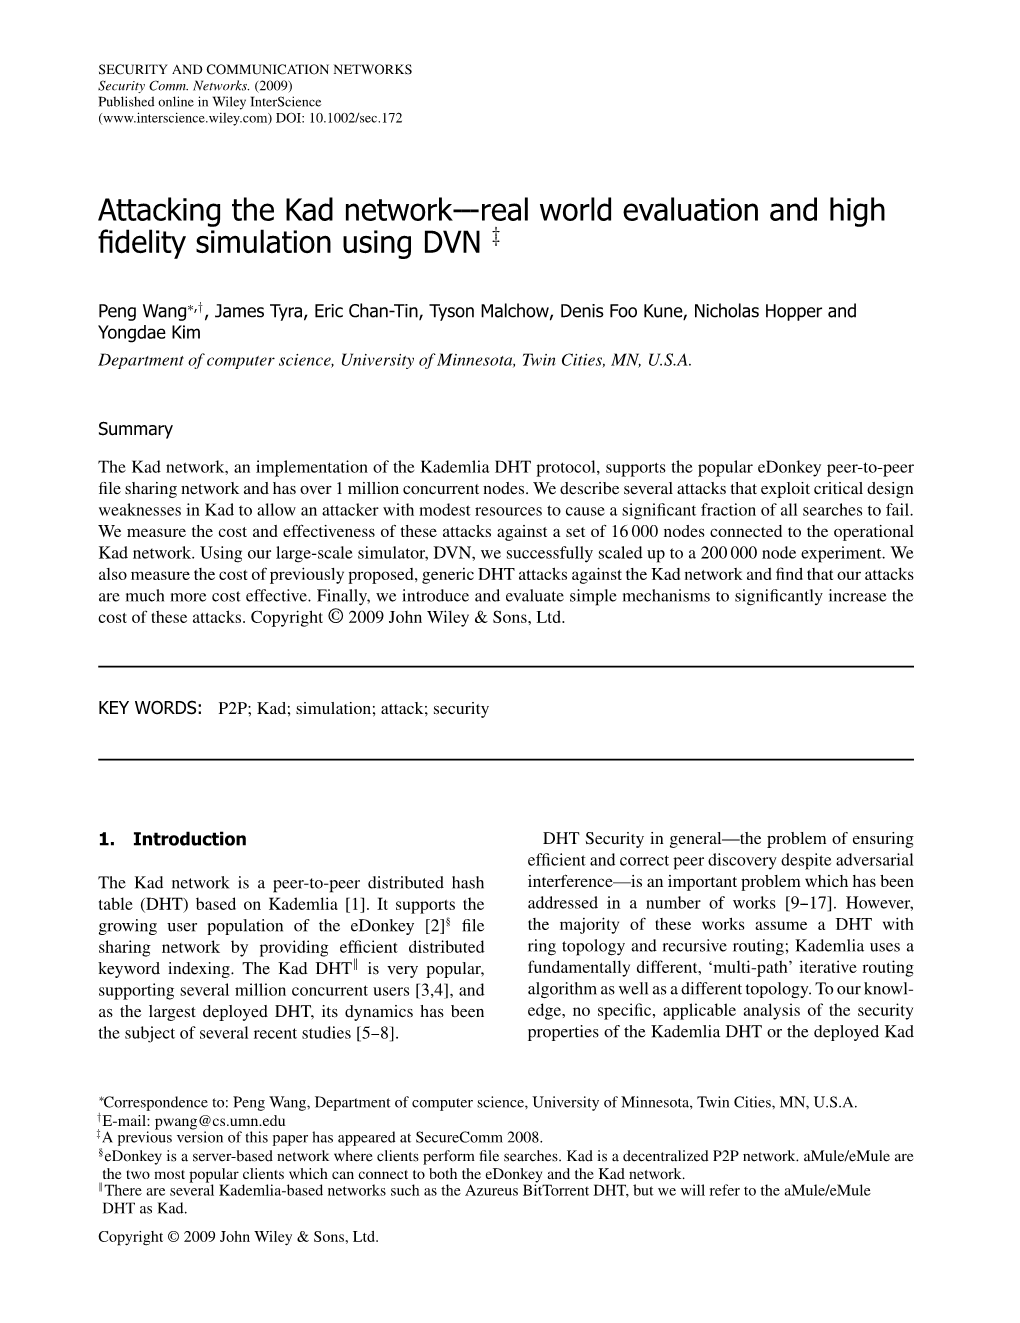 Attacking the Kad Network---Real World Evaluation and High ﬁdelity Simulation Using DVN ‡